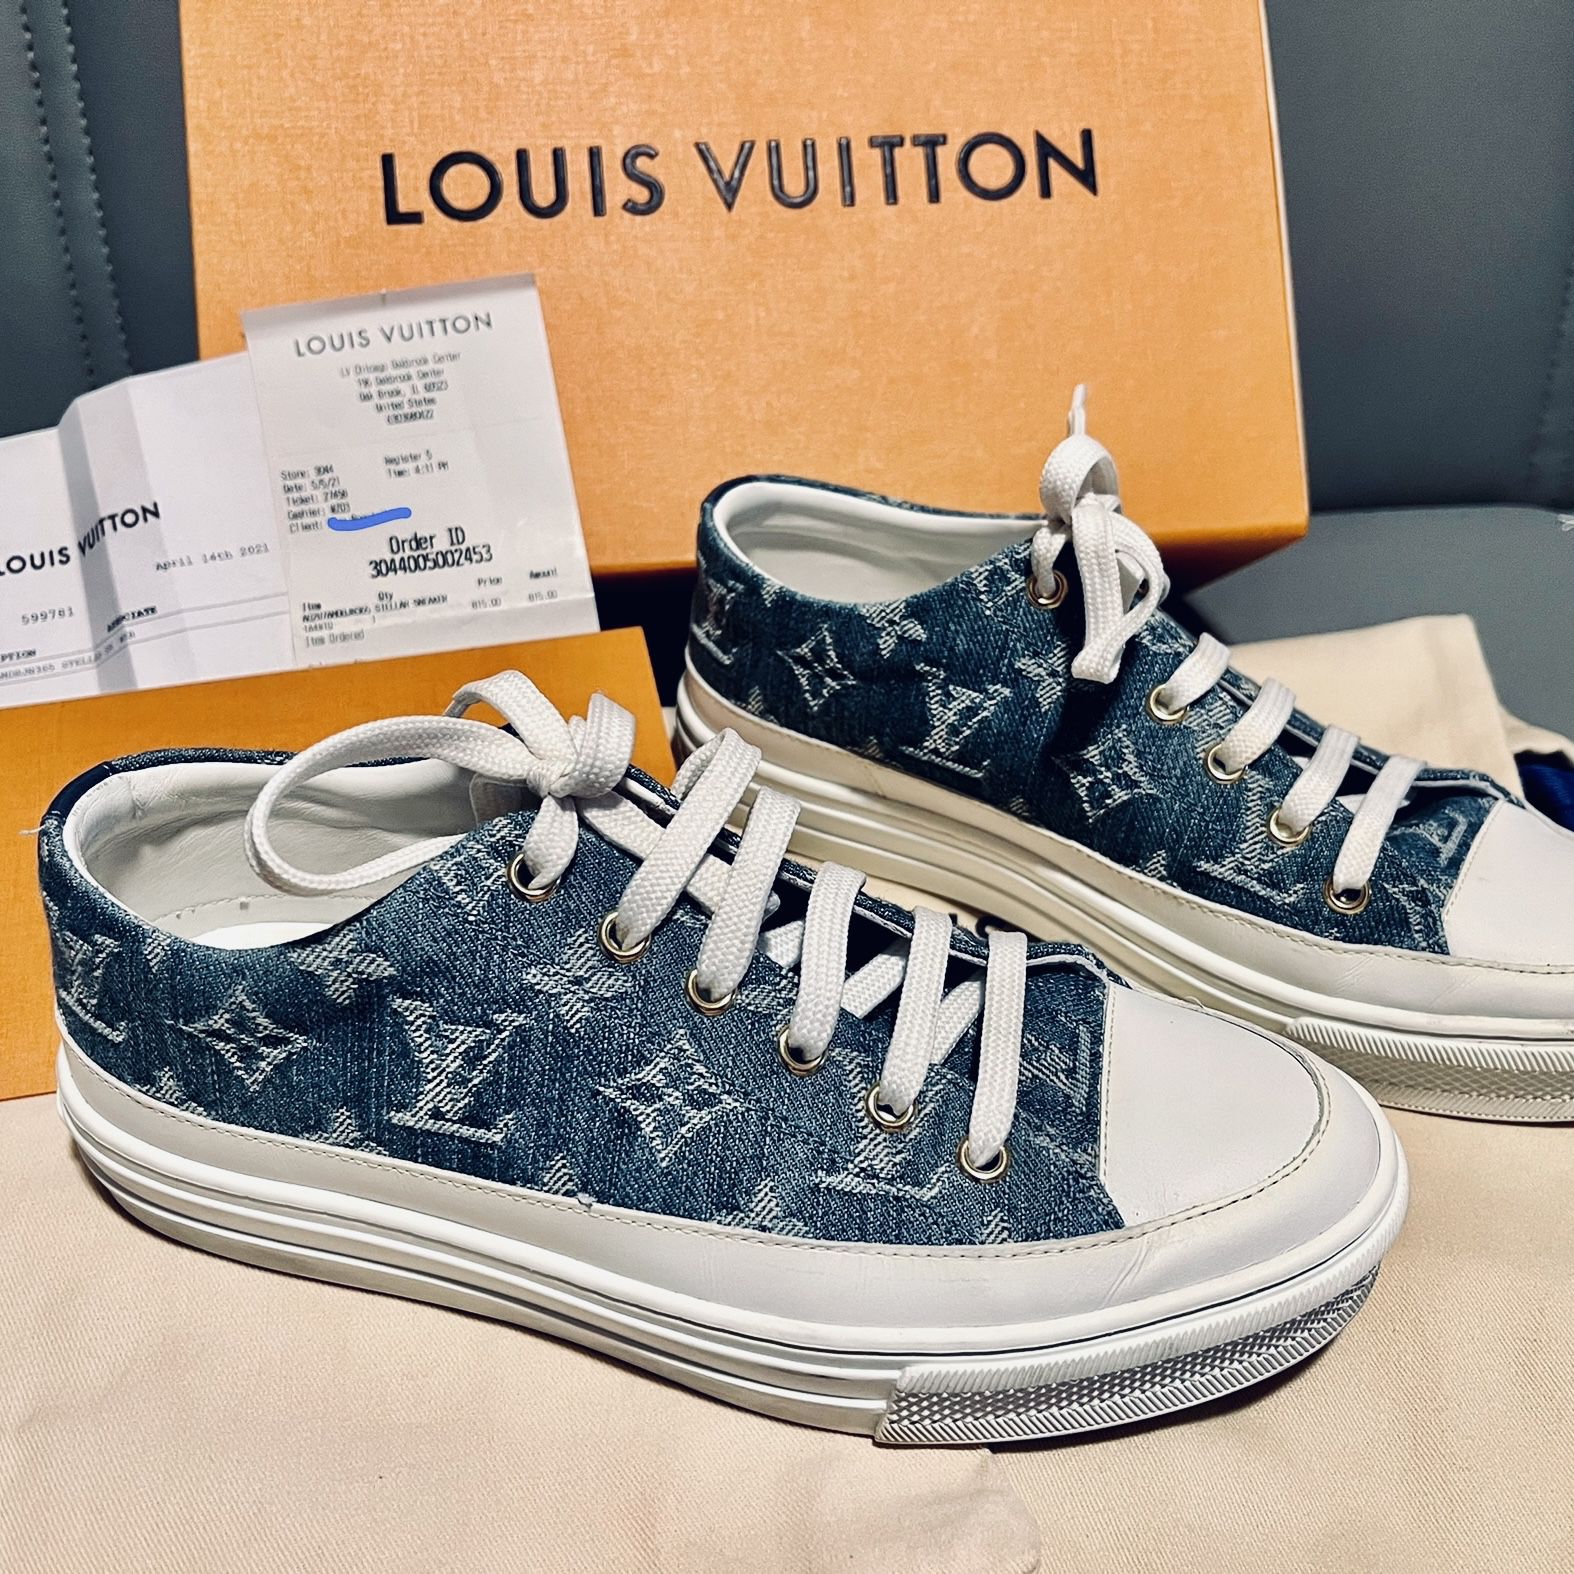 Louis Vuitton's Chicago Sneakers Go on Sale Wednesday – Chicago